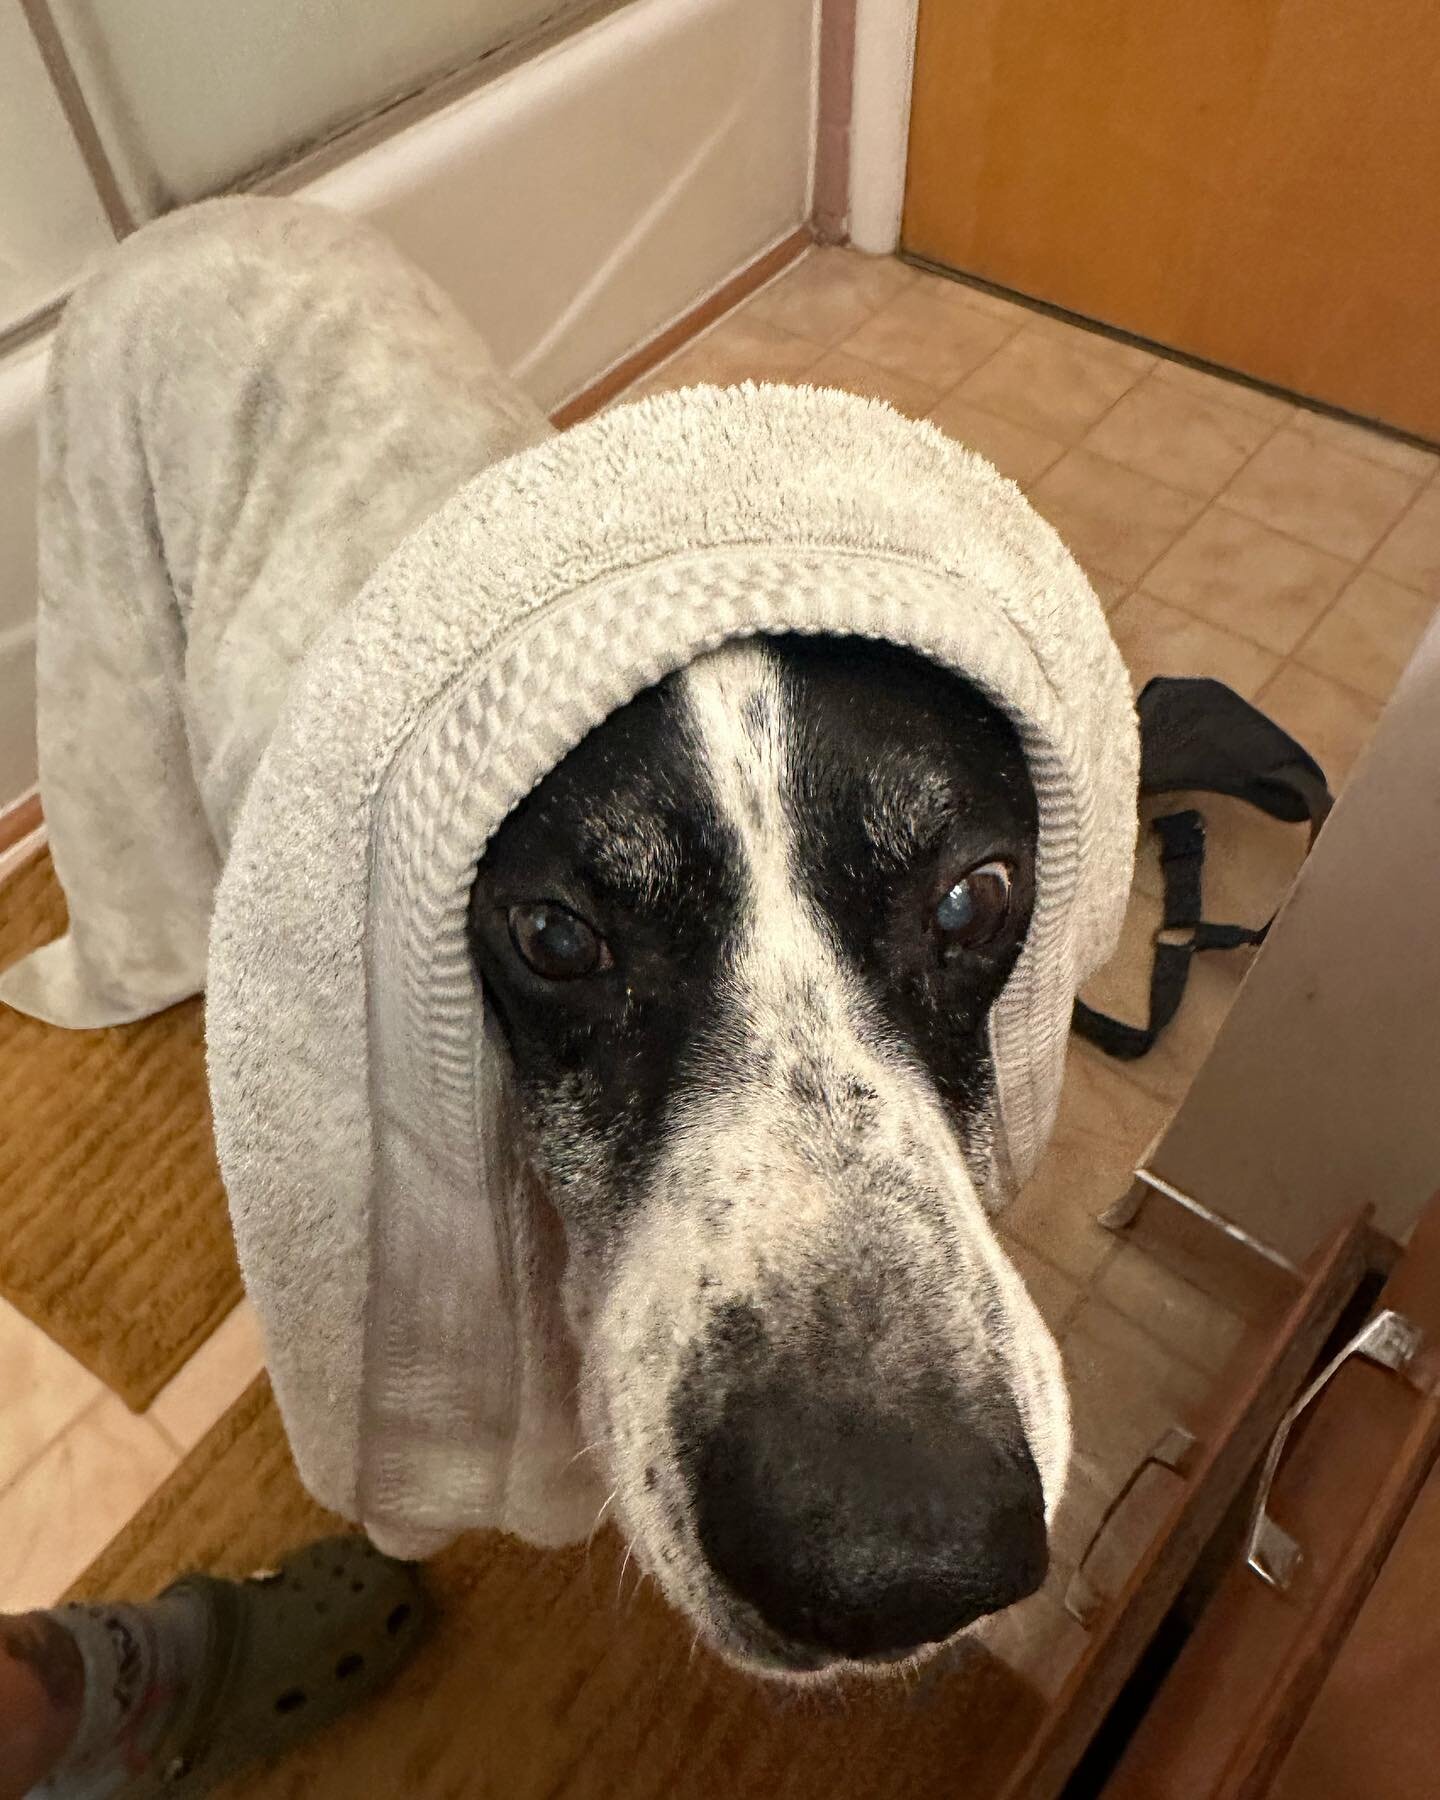 Jenkins wants to let you all know to be careful for scammers. 

He got lured into a bathroom yesterday with peanut butter and ended up with a bath. He&rsquo;s really embarrassed he got scammed and wants you all to be aware! 

______ 
 Paypal: goldenb